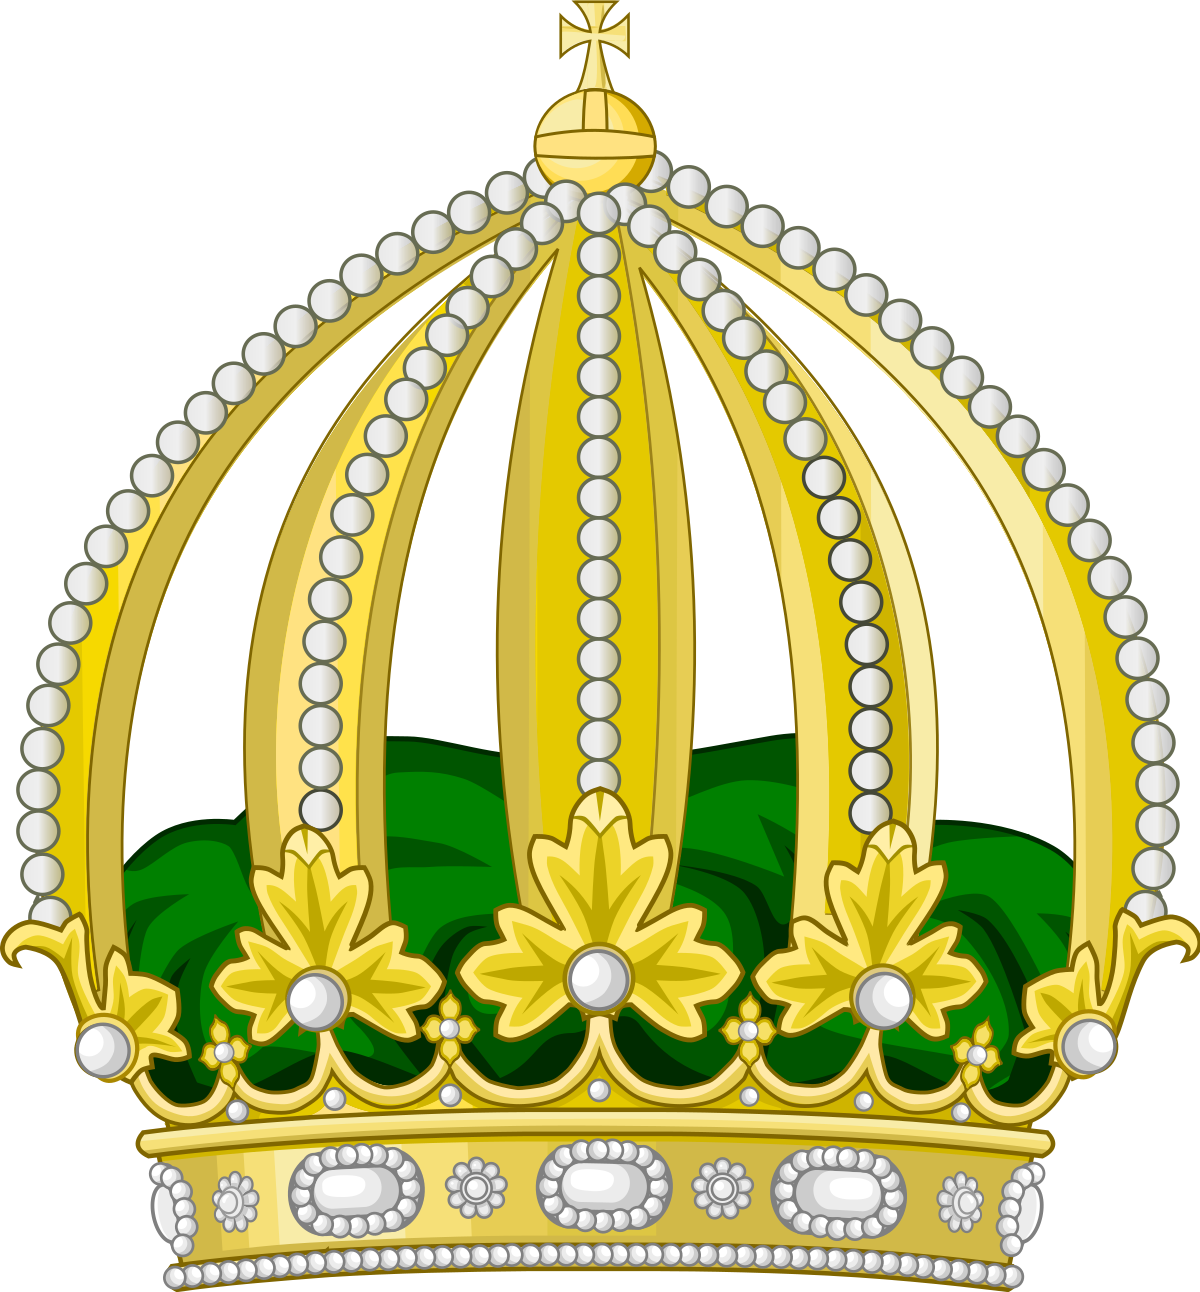 Download File:Imperial Crown Brazil.svg - Wikipedia